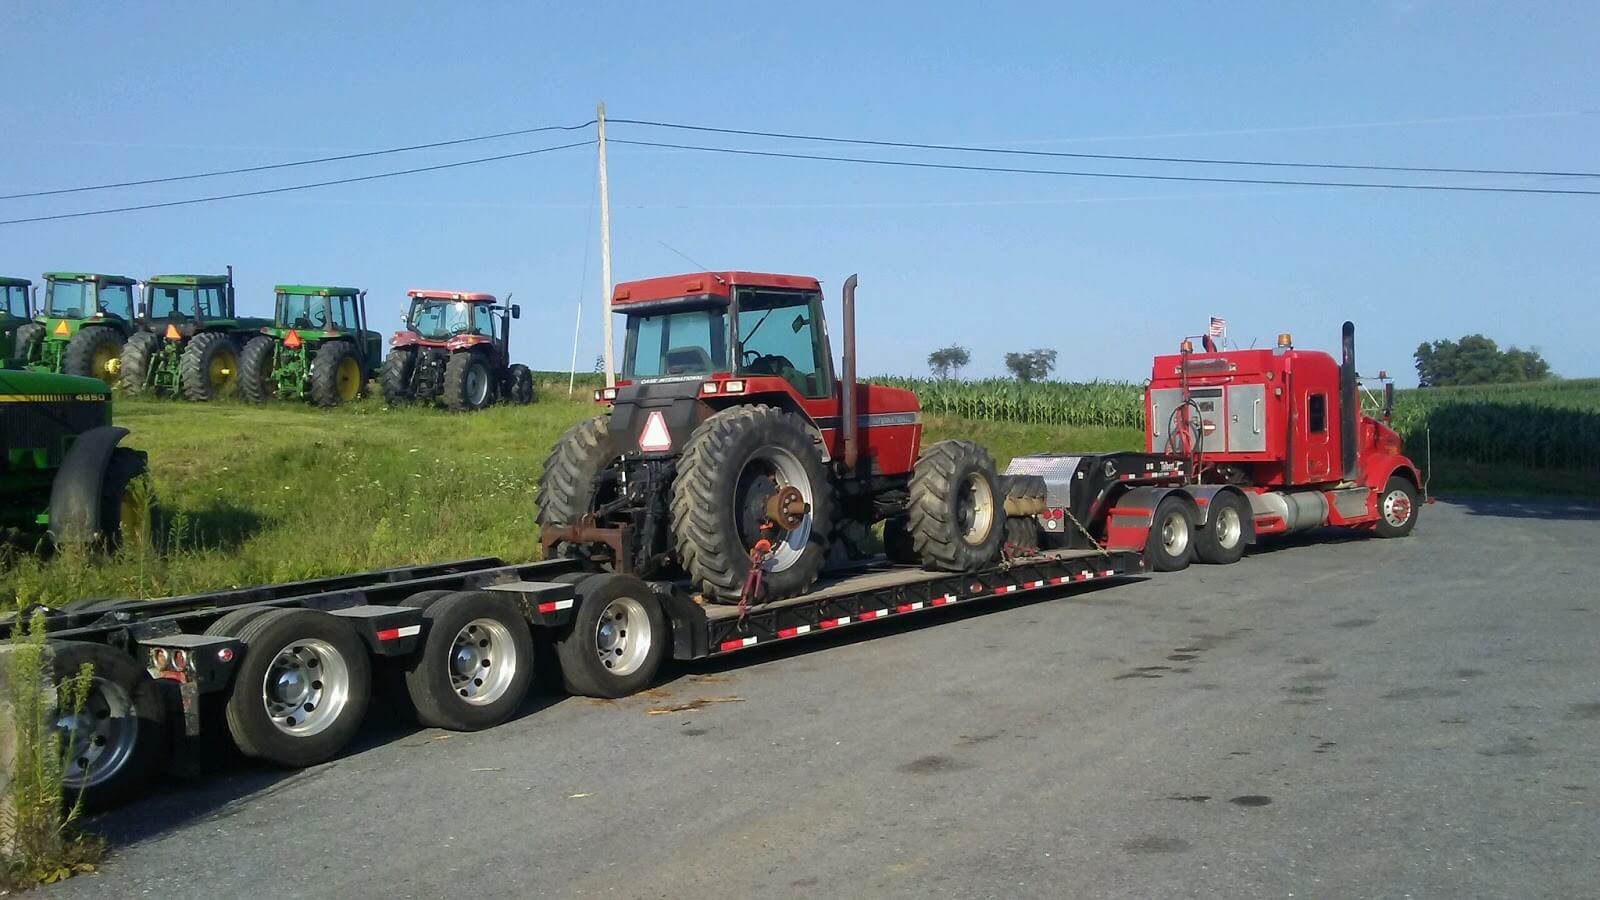  Case IH 1720 Tractor being transported